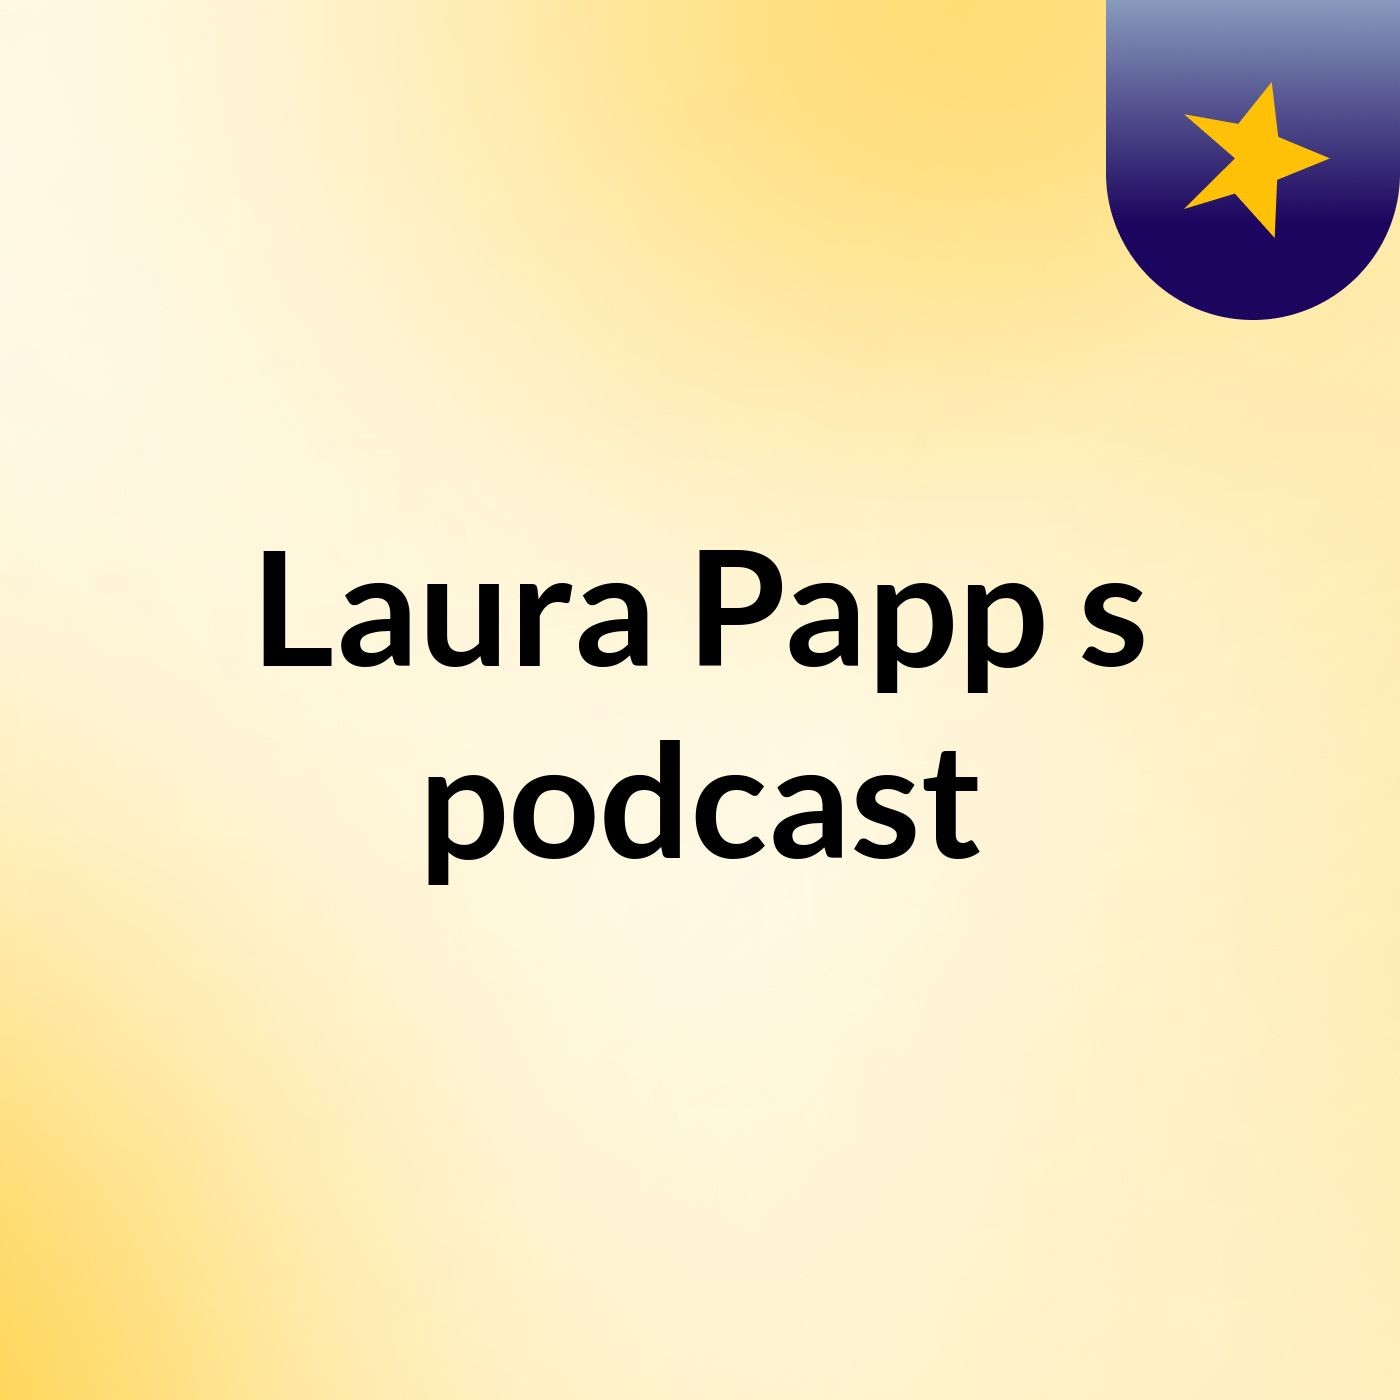 Laura Papp's podcast